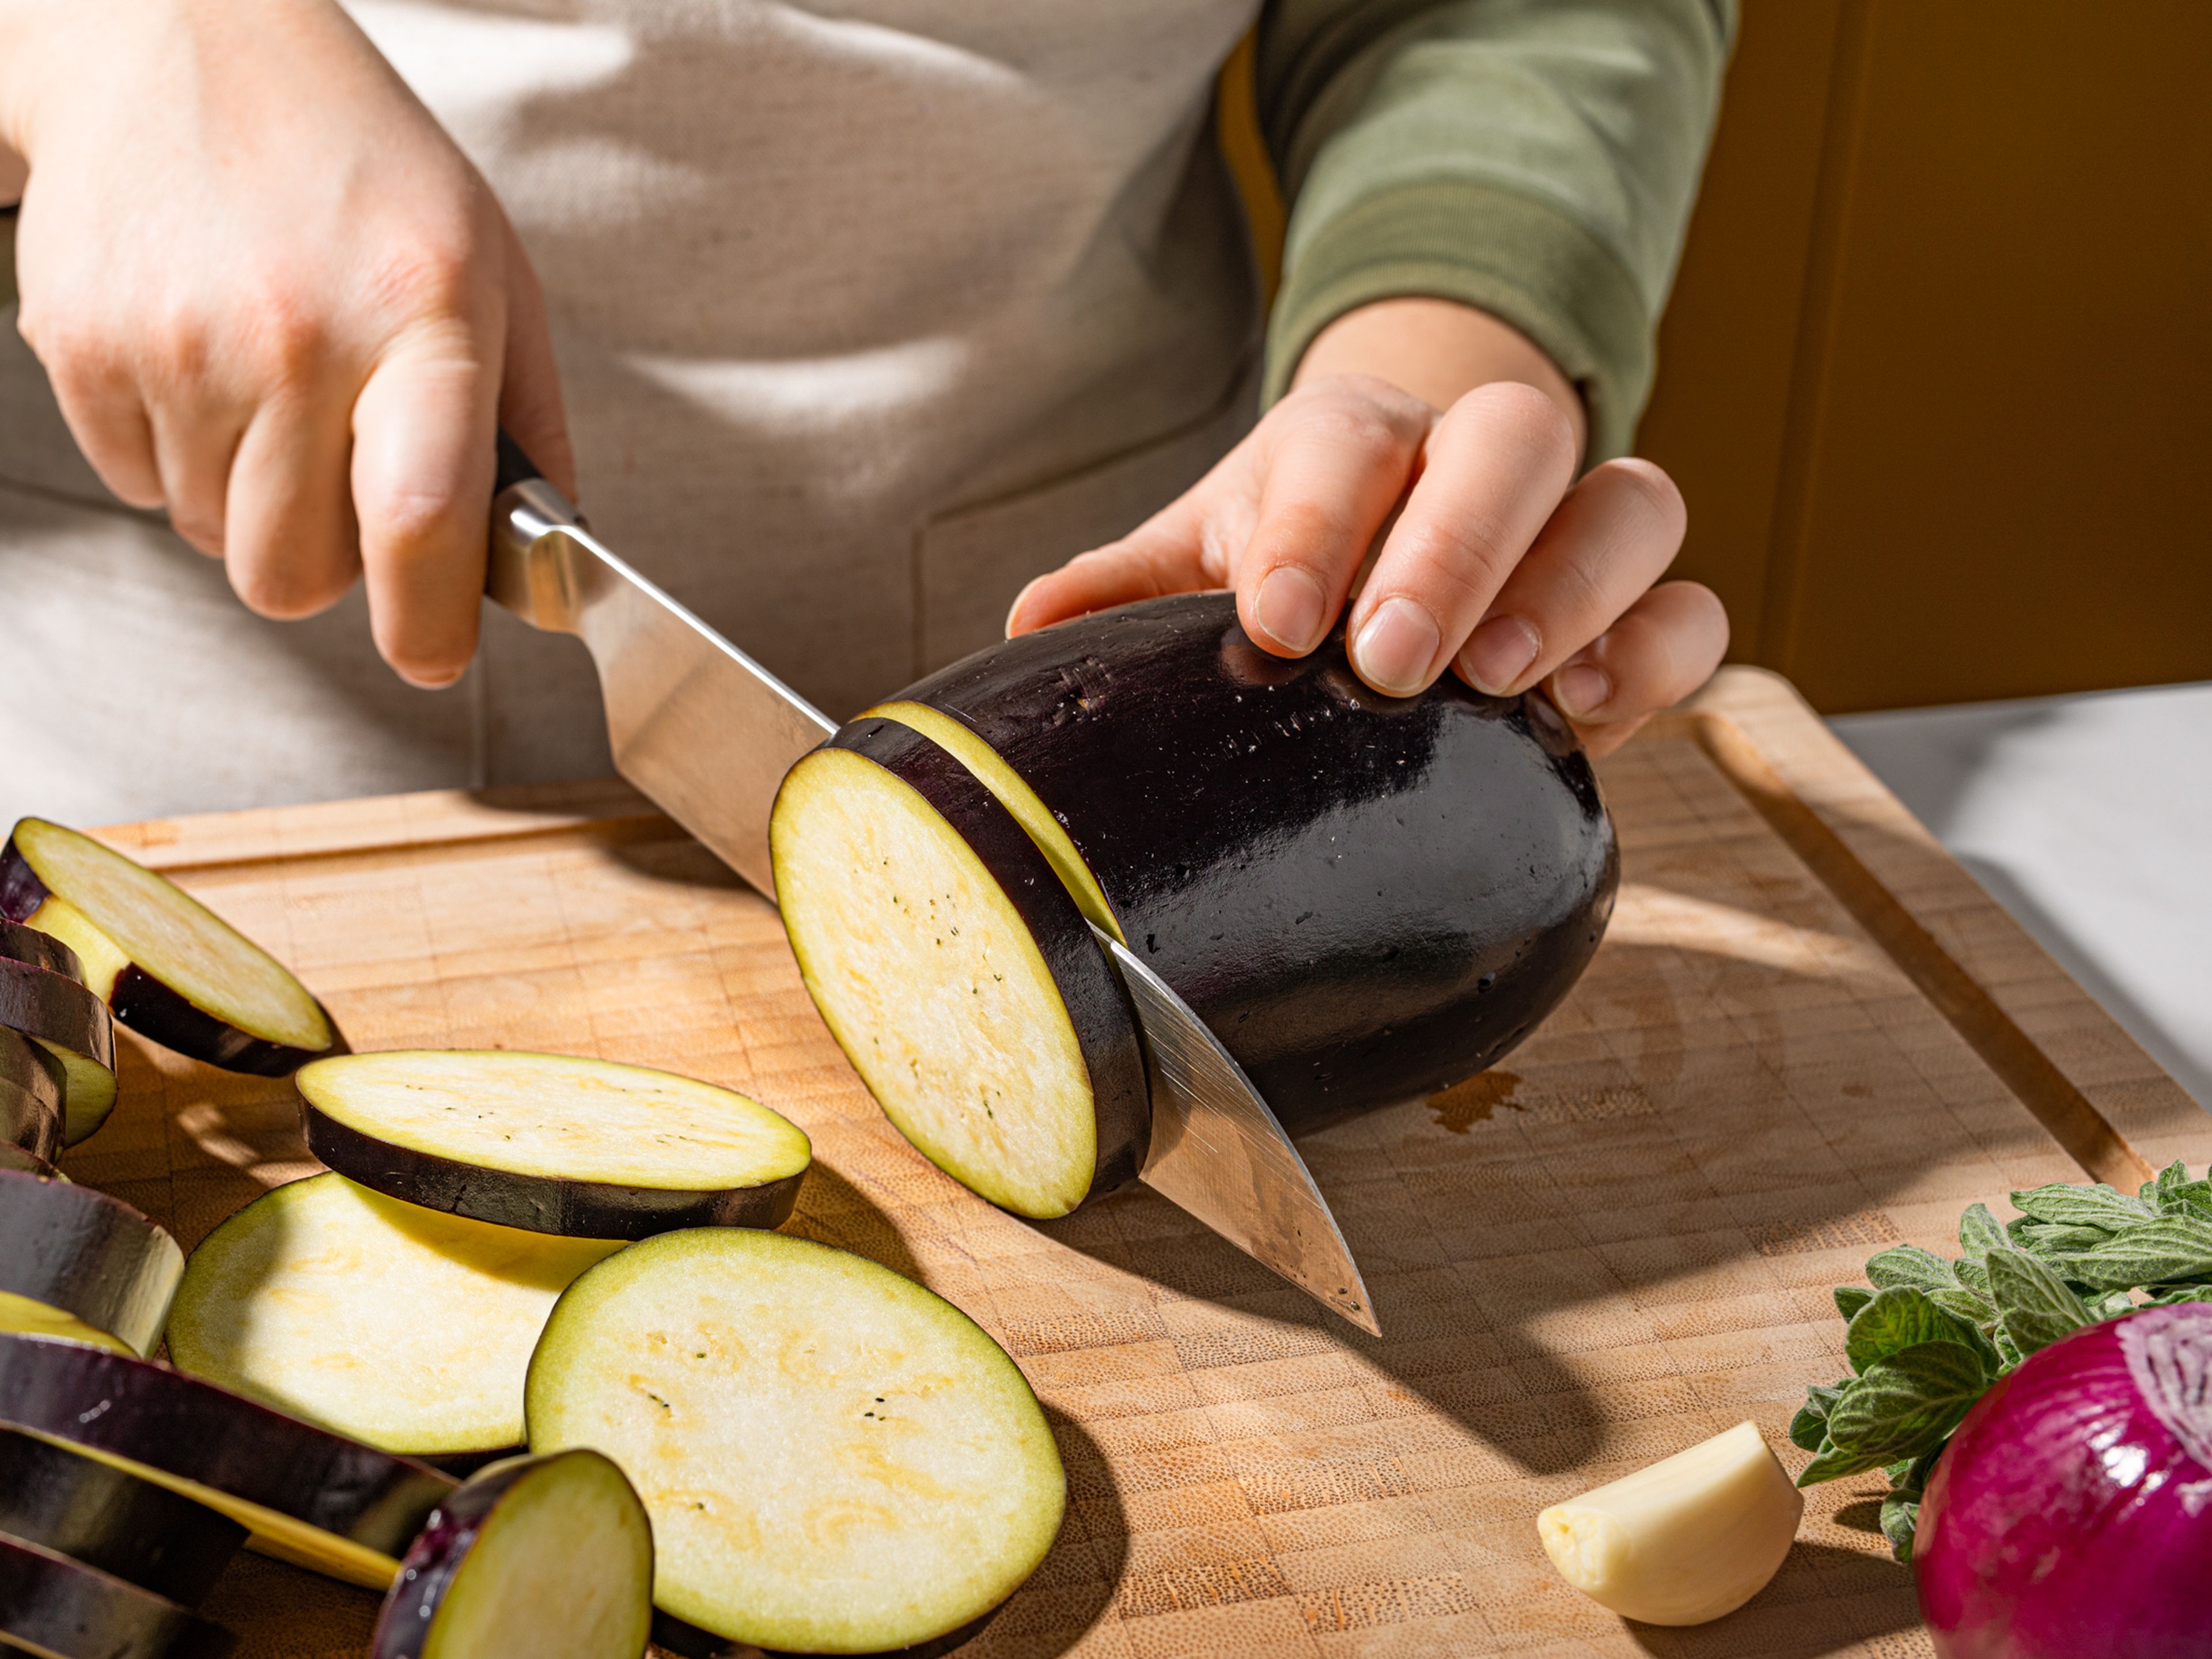 Slice the eggplant into thick rounds. Transfer to a large bowl, add salt and let sit for 30 min. Chop onions and garlic into cubes. Finely chop oregano. Slice the cooked potatoes.